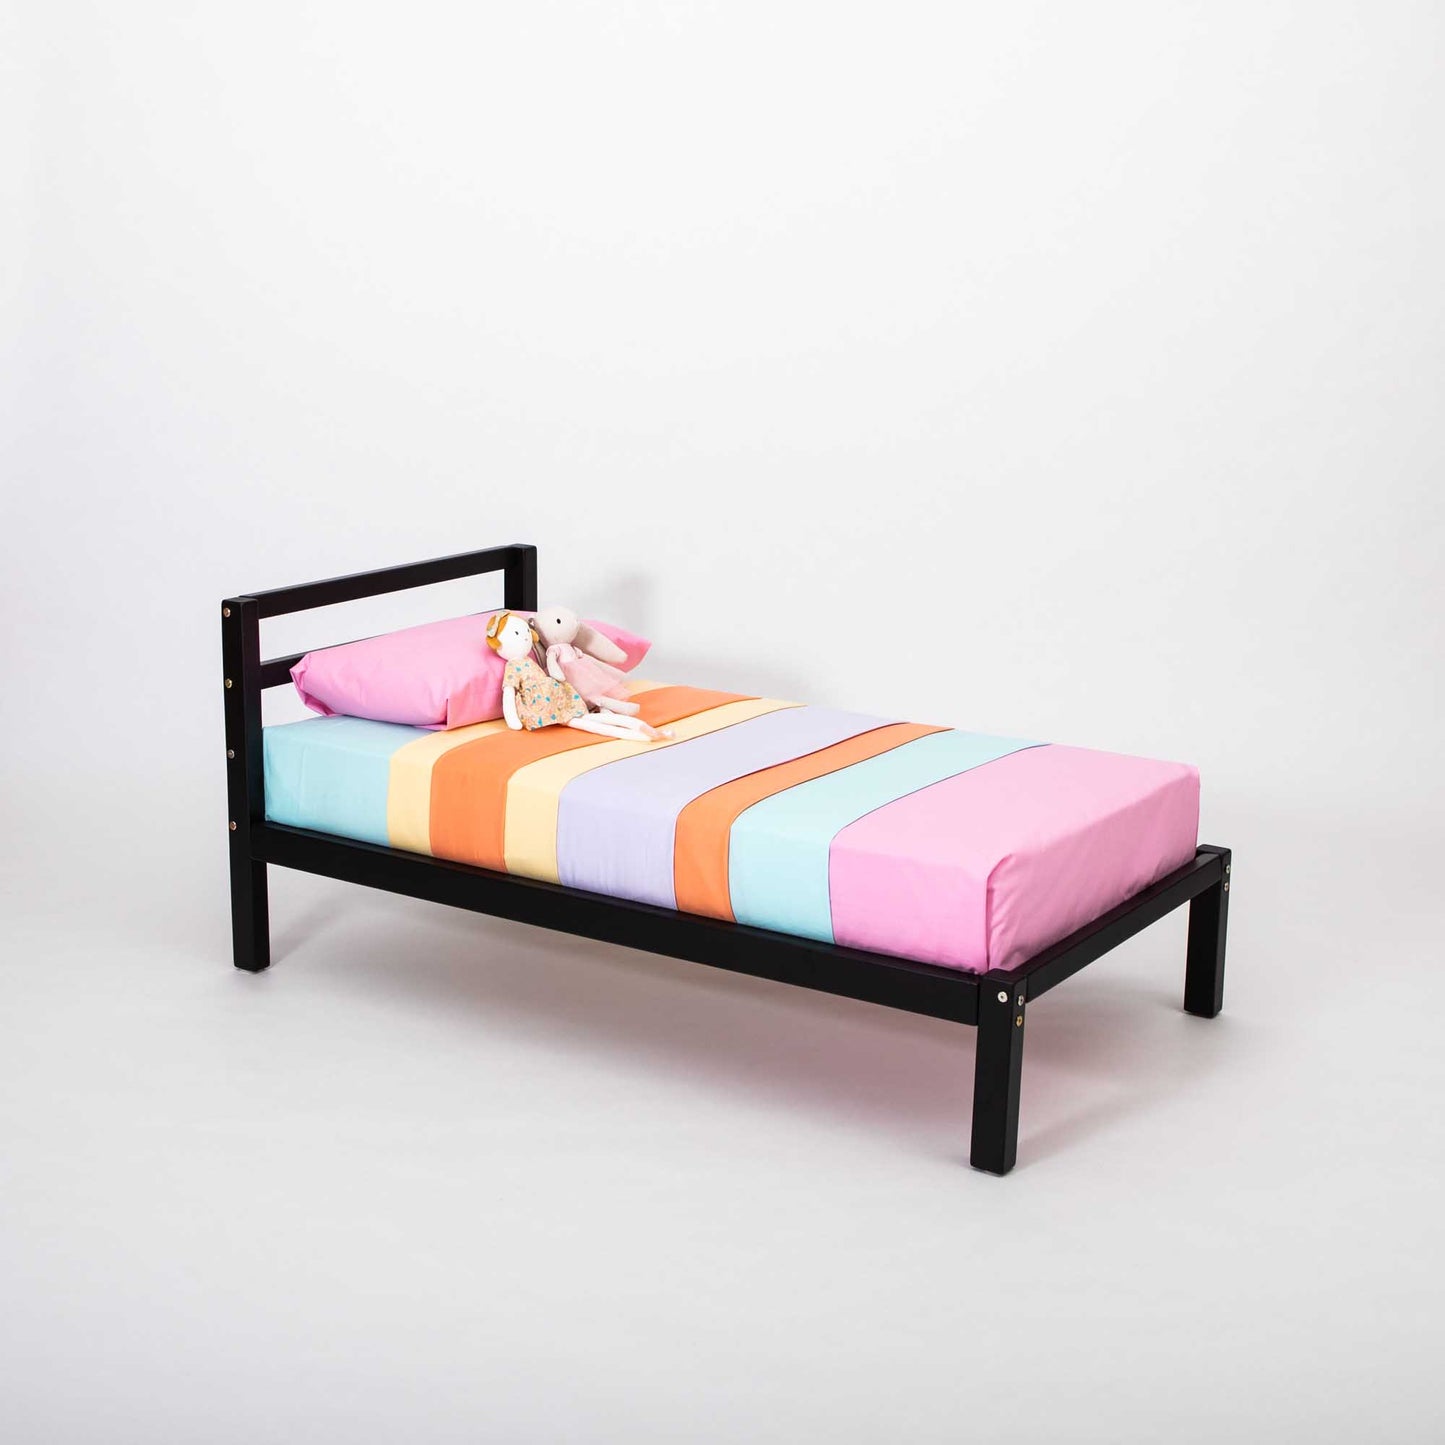 This Sweet Home From Wood 2-in-1 transformable kids' bed with a horizontal rail headboard features a design and is perfect for children as it grows with them. It showcases a vibrant and colorful bed sheet.